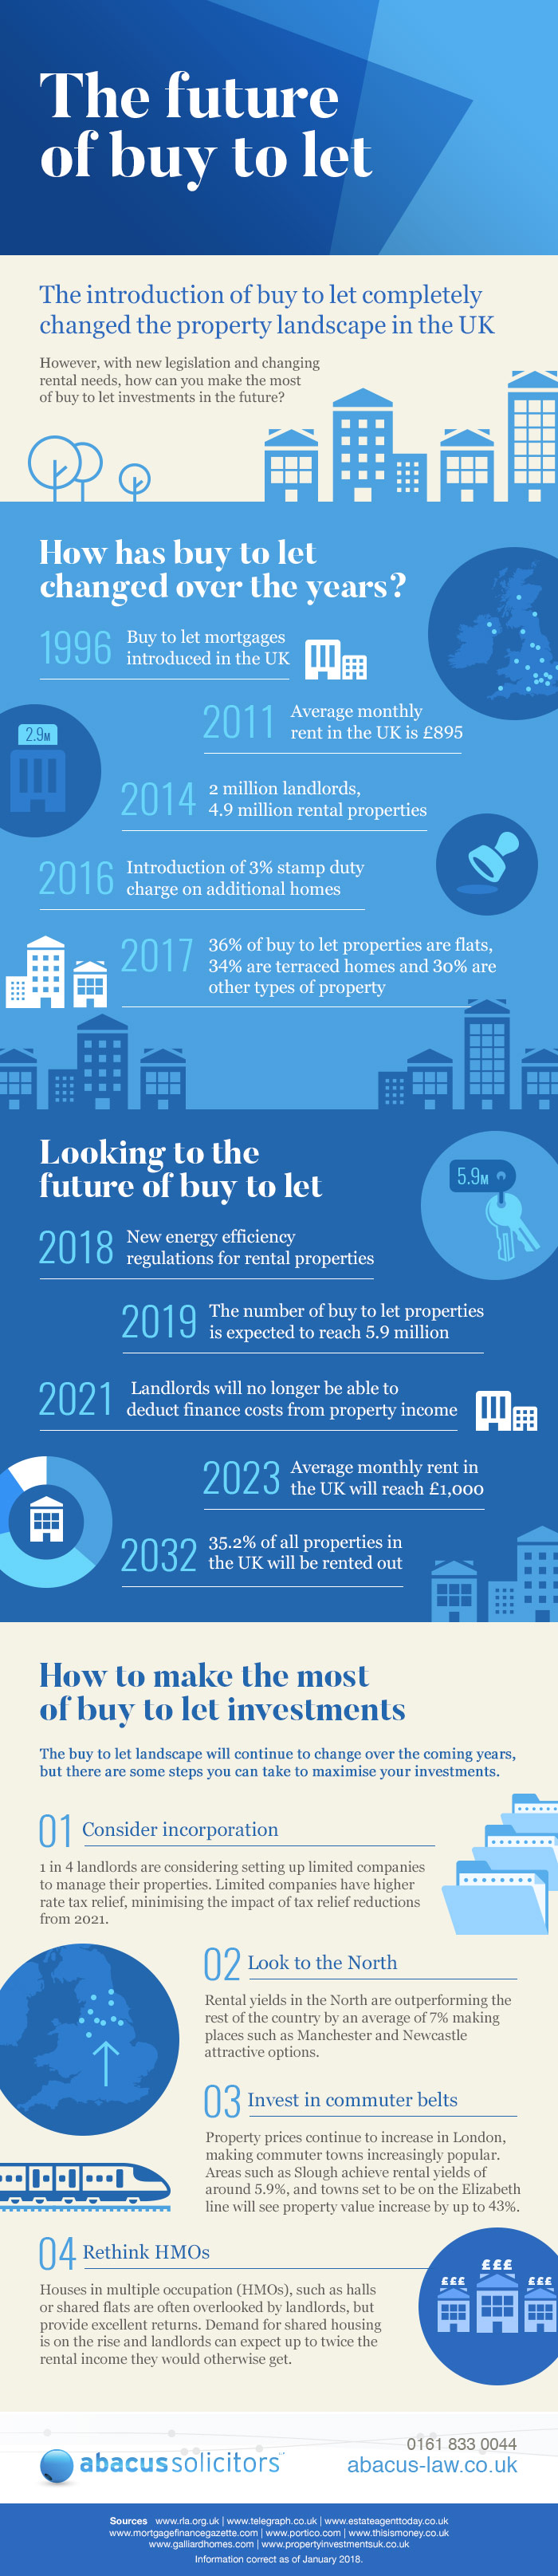 Future of buy to let